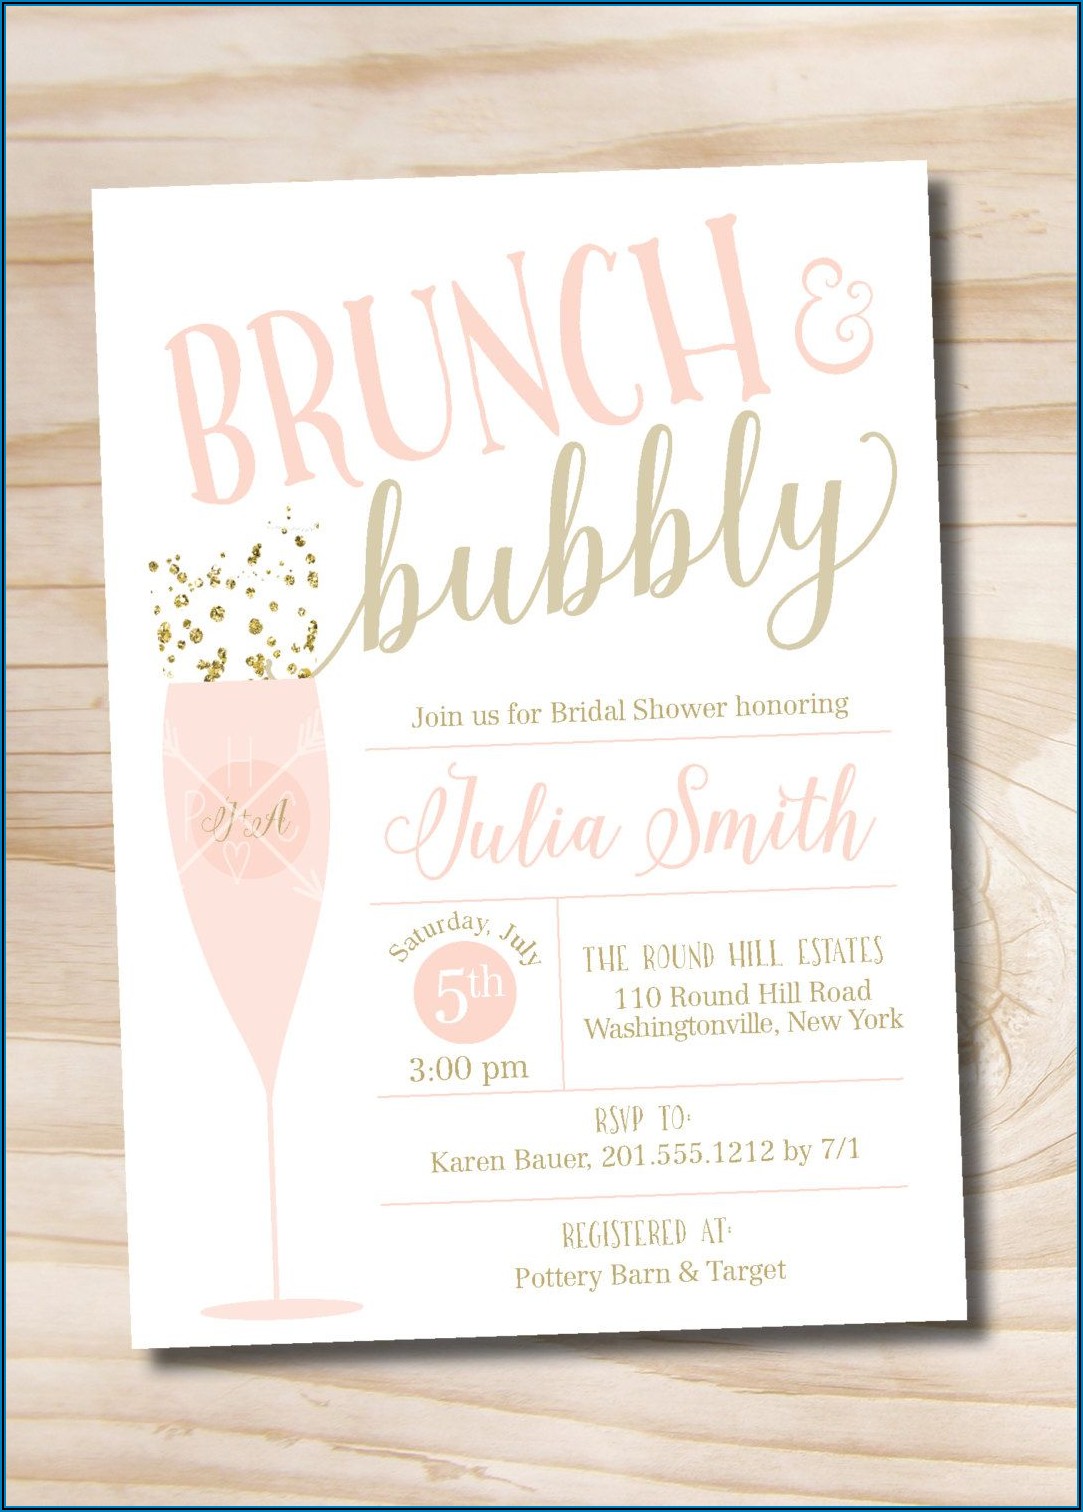 Brunch And Bubbly Invitation Wording